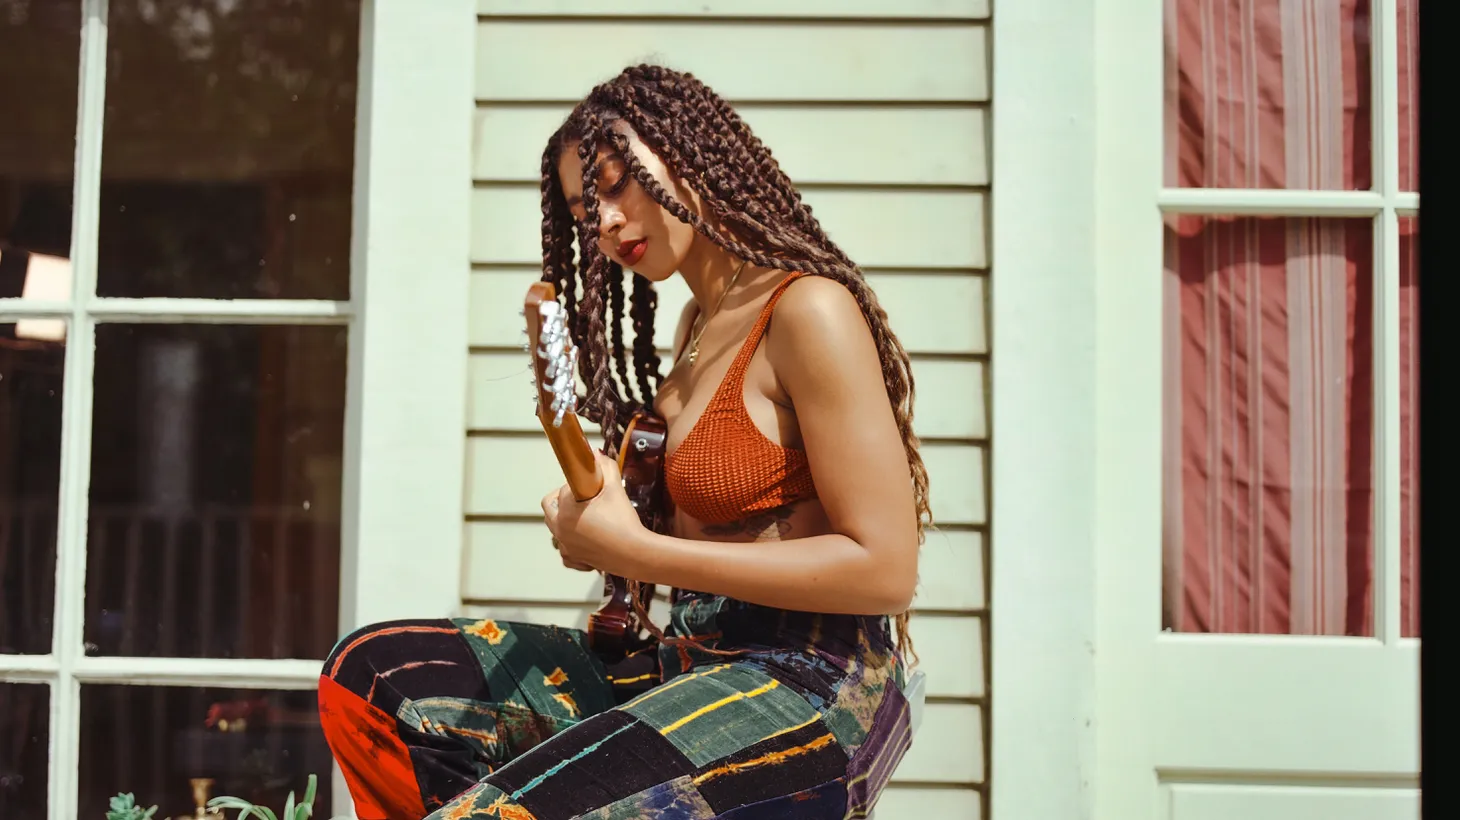 Music is meant to build community — which is just the intention and truth behind 21-year-old Bay Area newcomer Satya’s latest single, “Oakland,” a love letter to her hometown and chosen family.